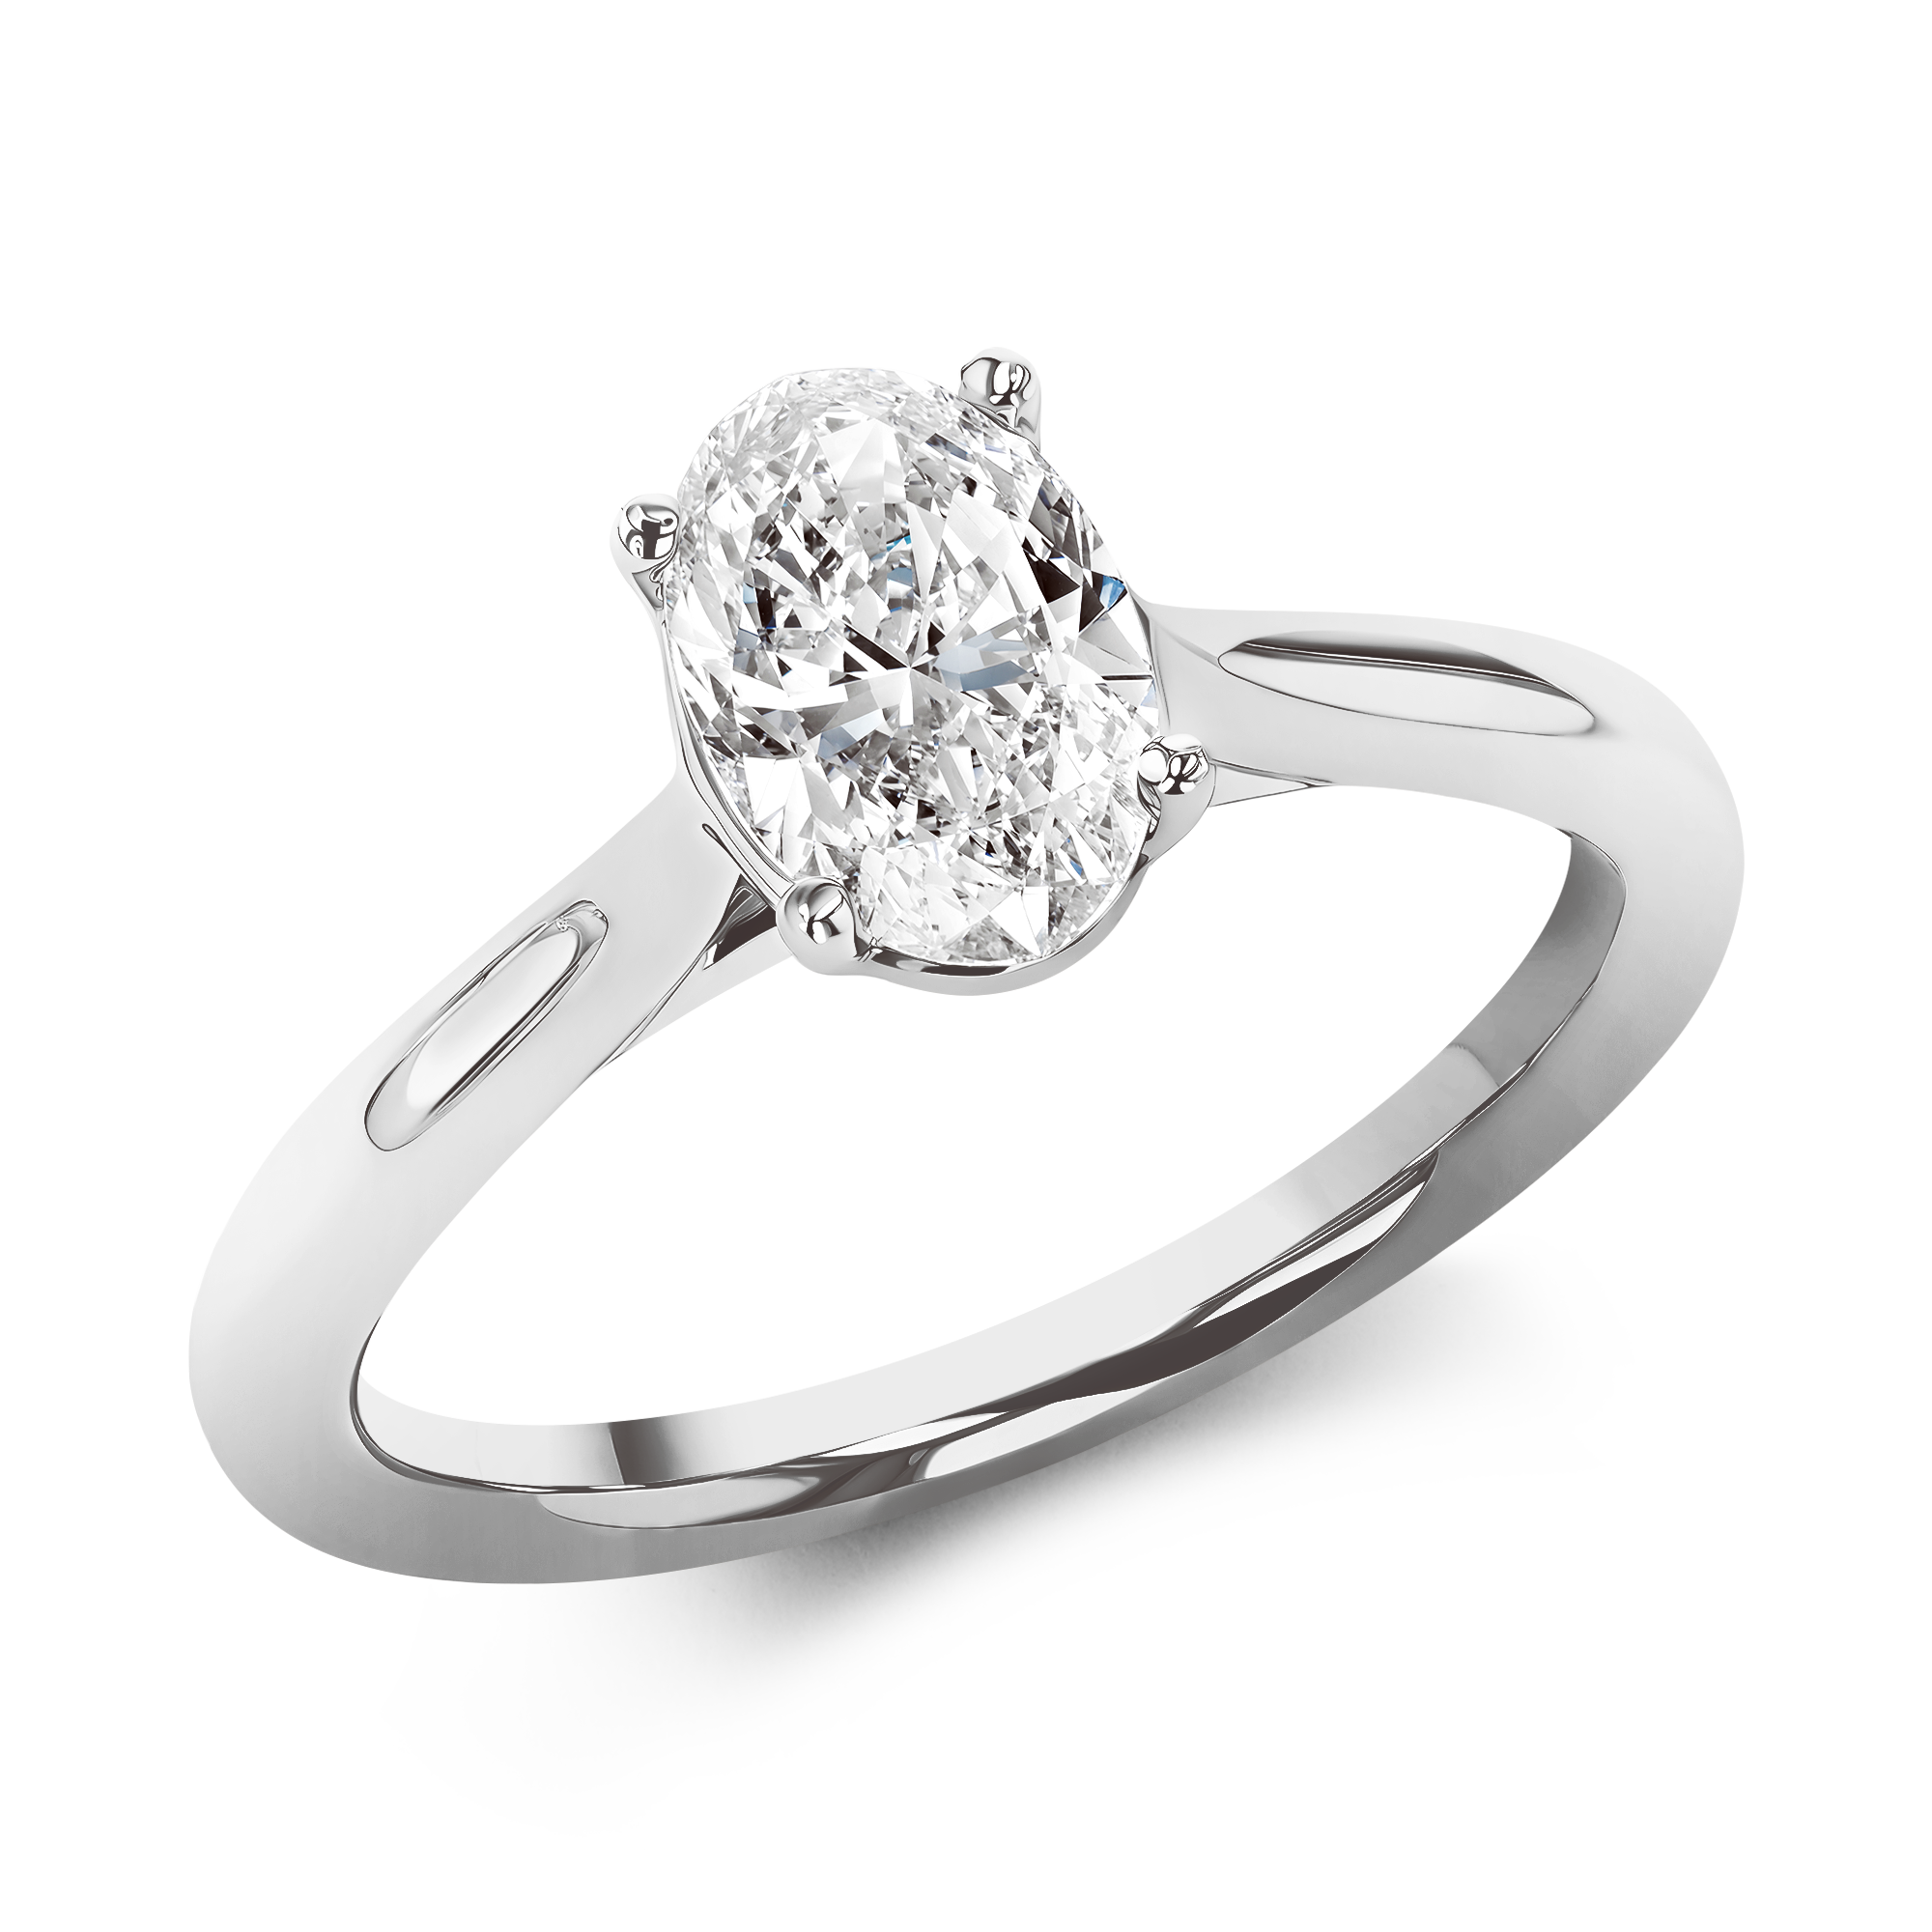 1.00CT Diamond Solitaire Ring Oval Cut, Four Claw Set_1